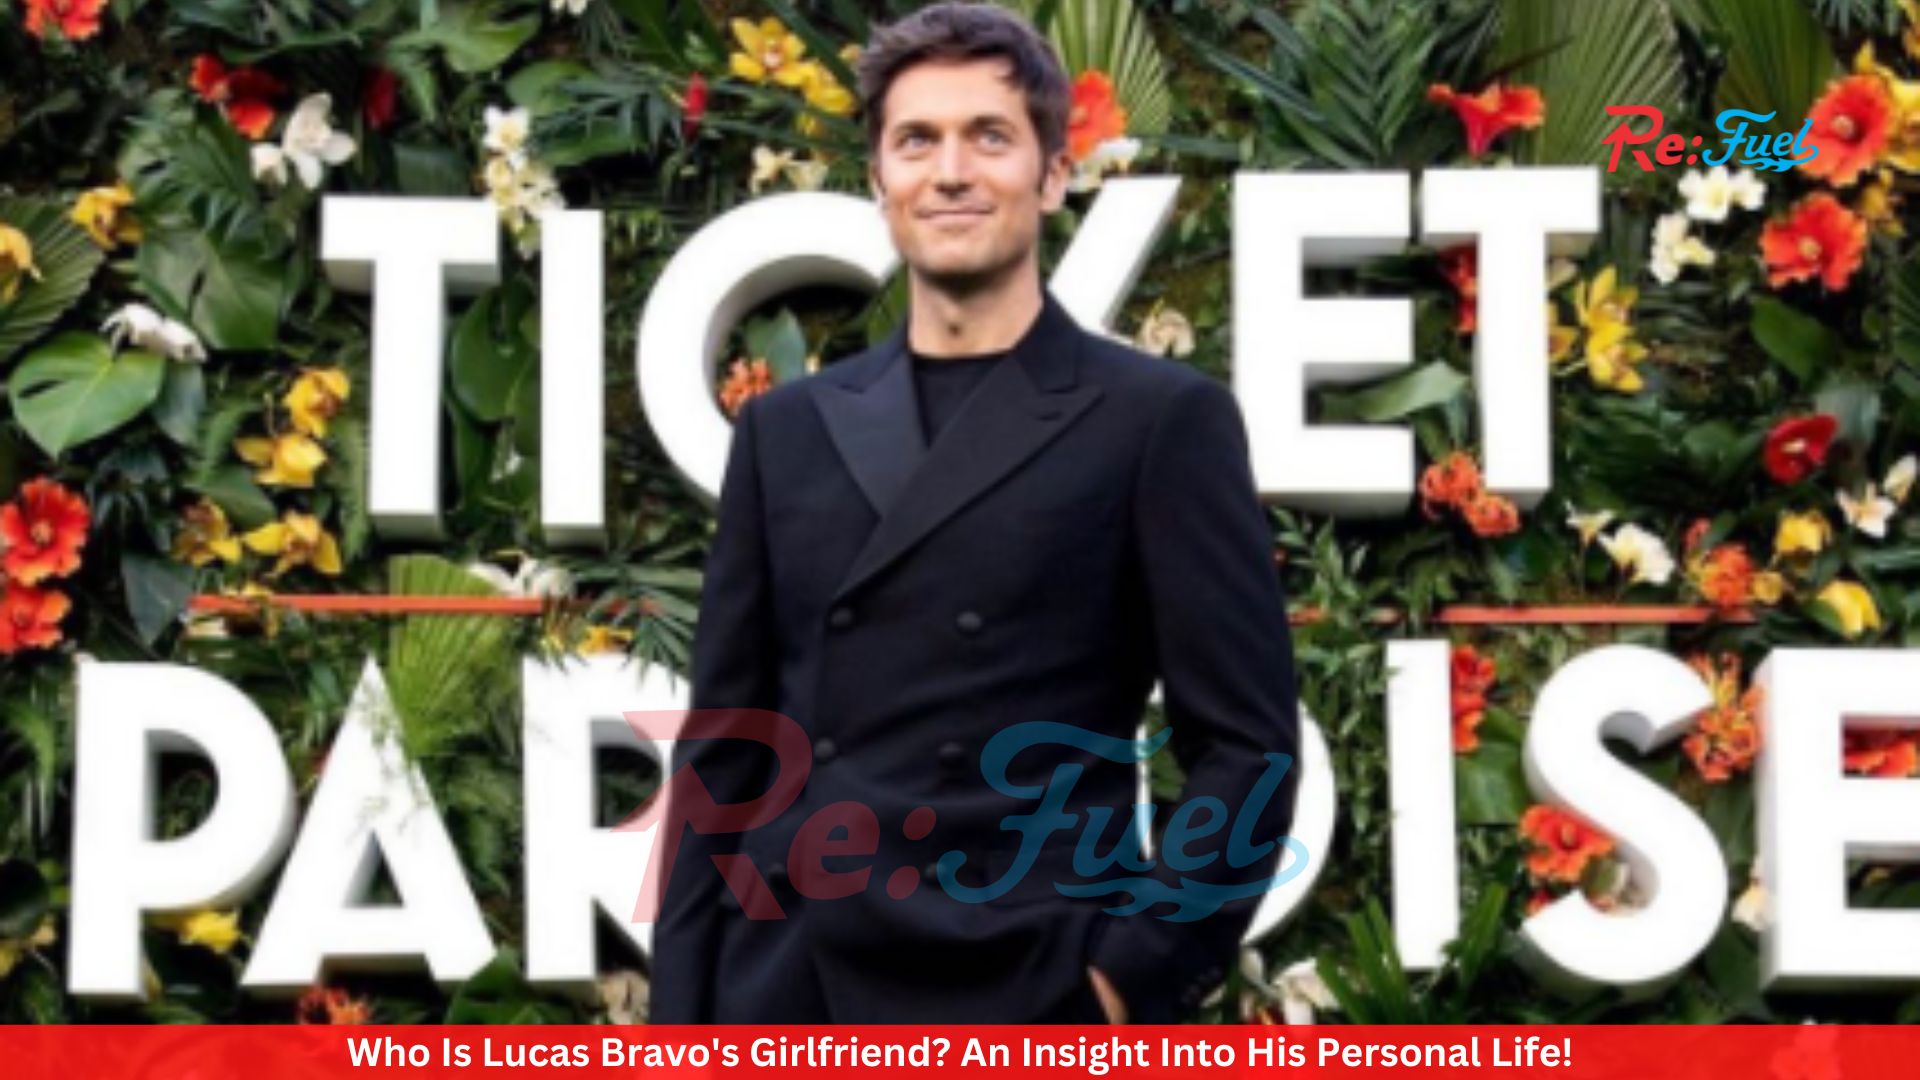 Who Is Lucas Bravo's Girlfriend? An Insight Into His Personal Life!